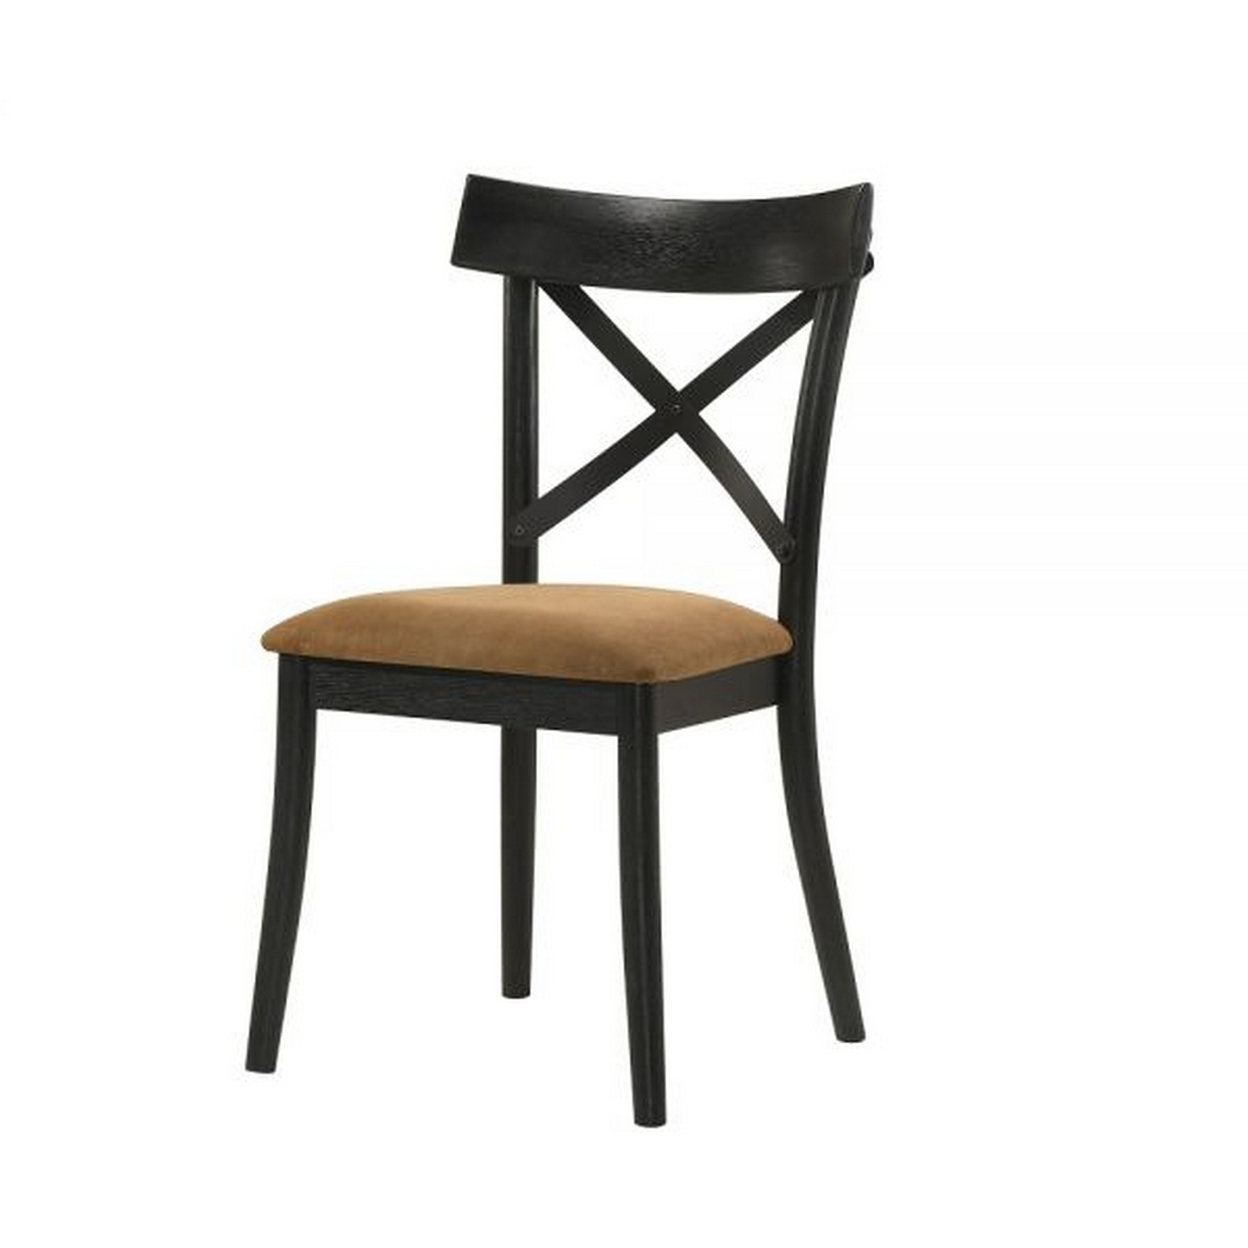 Hilly 21 Inch Dining Chair, Set Of 2, Crossbuck Backrest, Brown And Black - Saltoro Sherpi